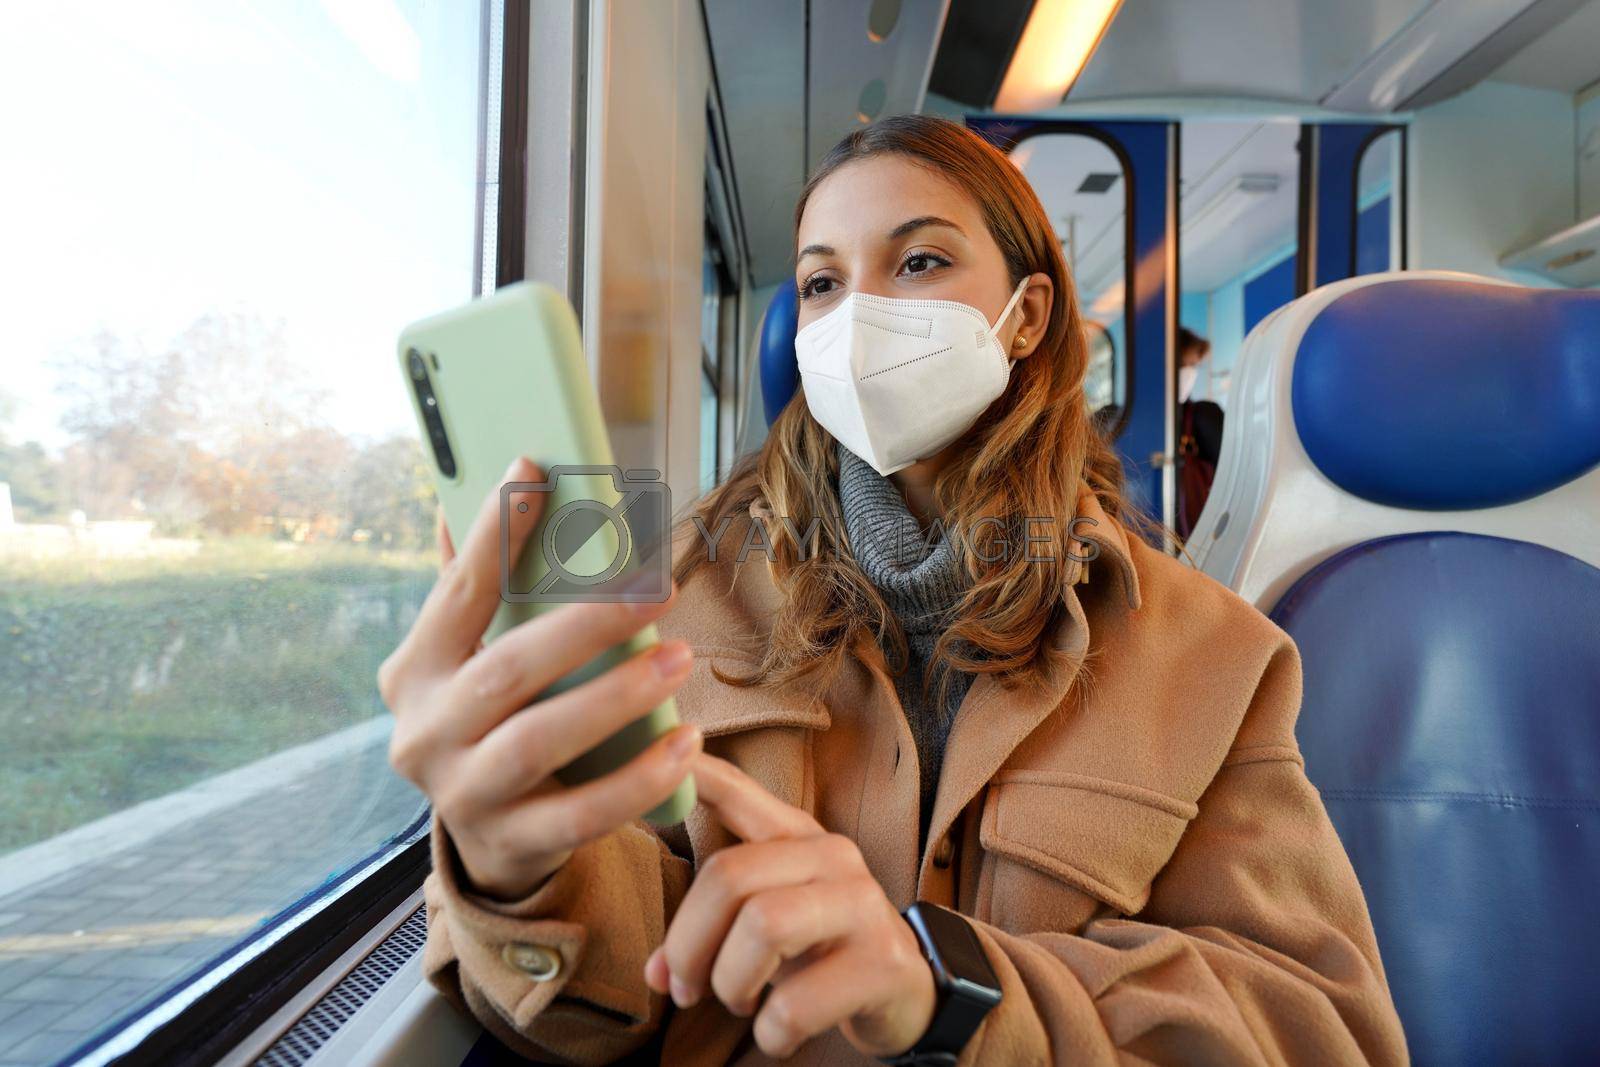 Omicron Variant. Woman traveling on train wearing medical protective face mask using smartphone. Low angle.